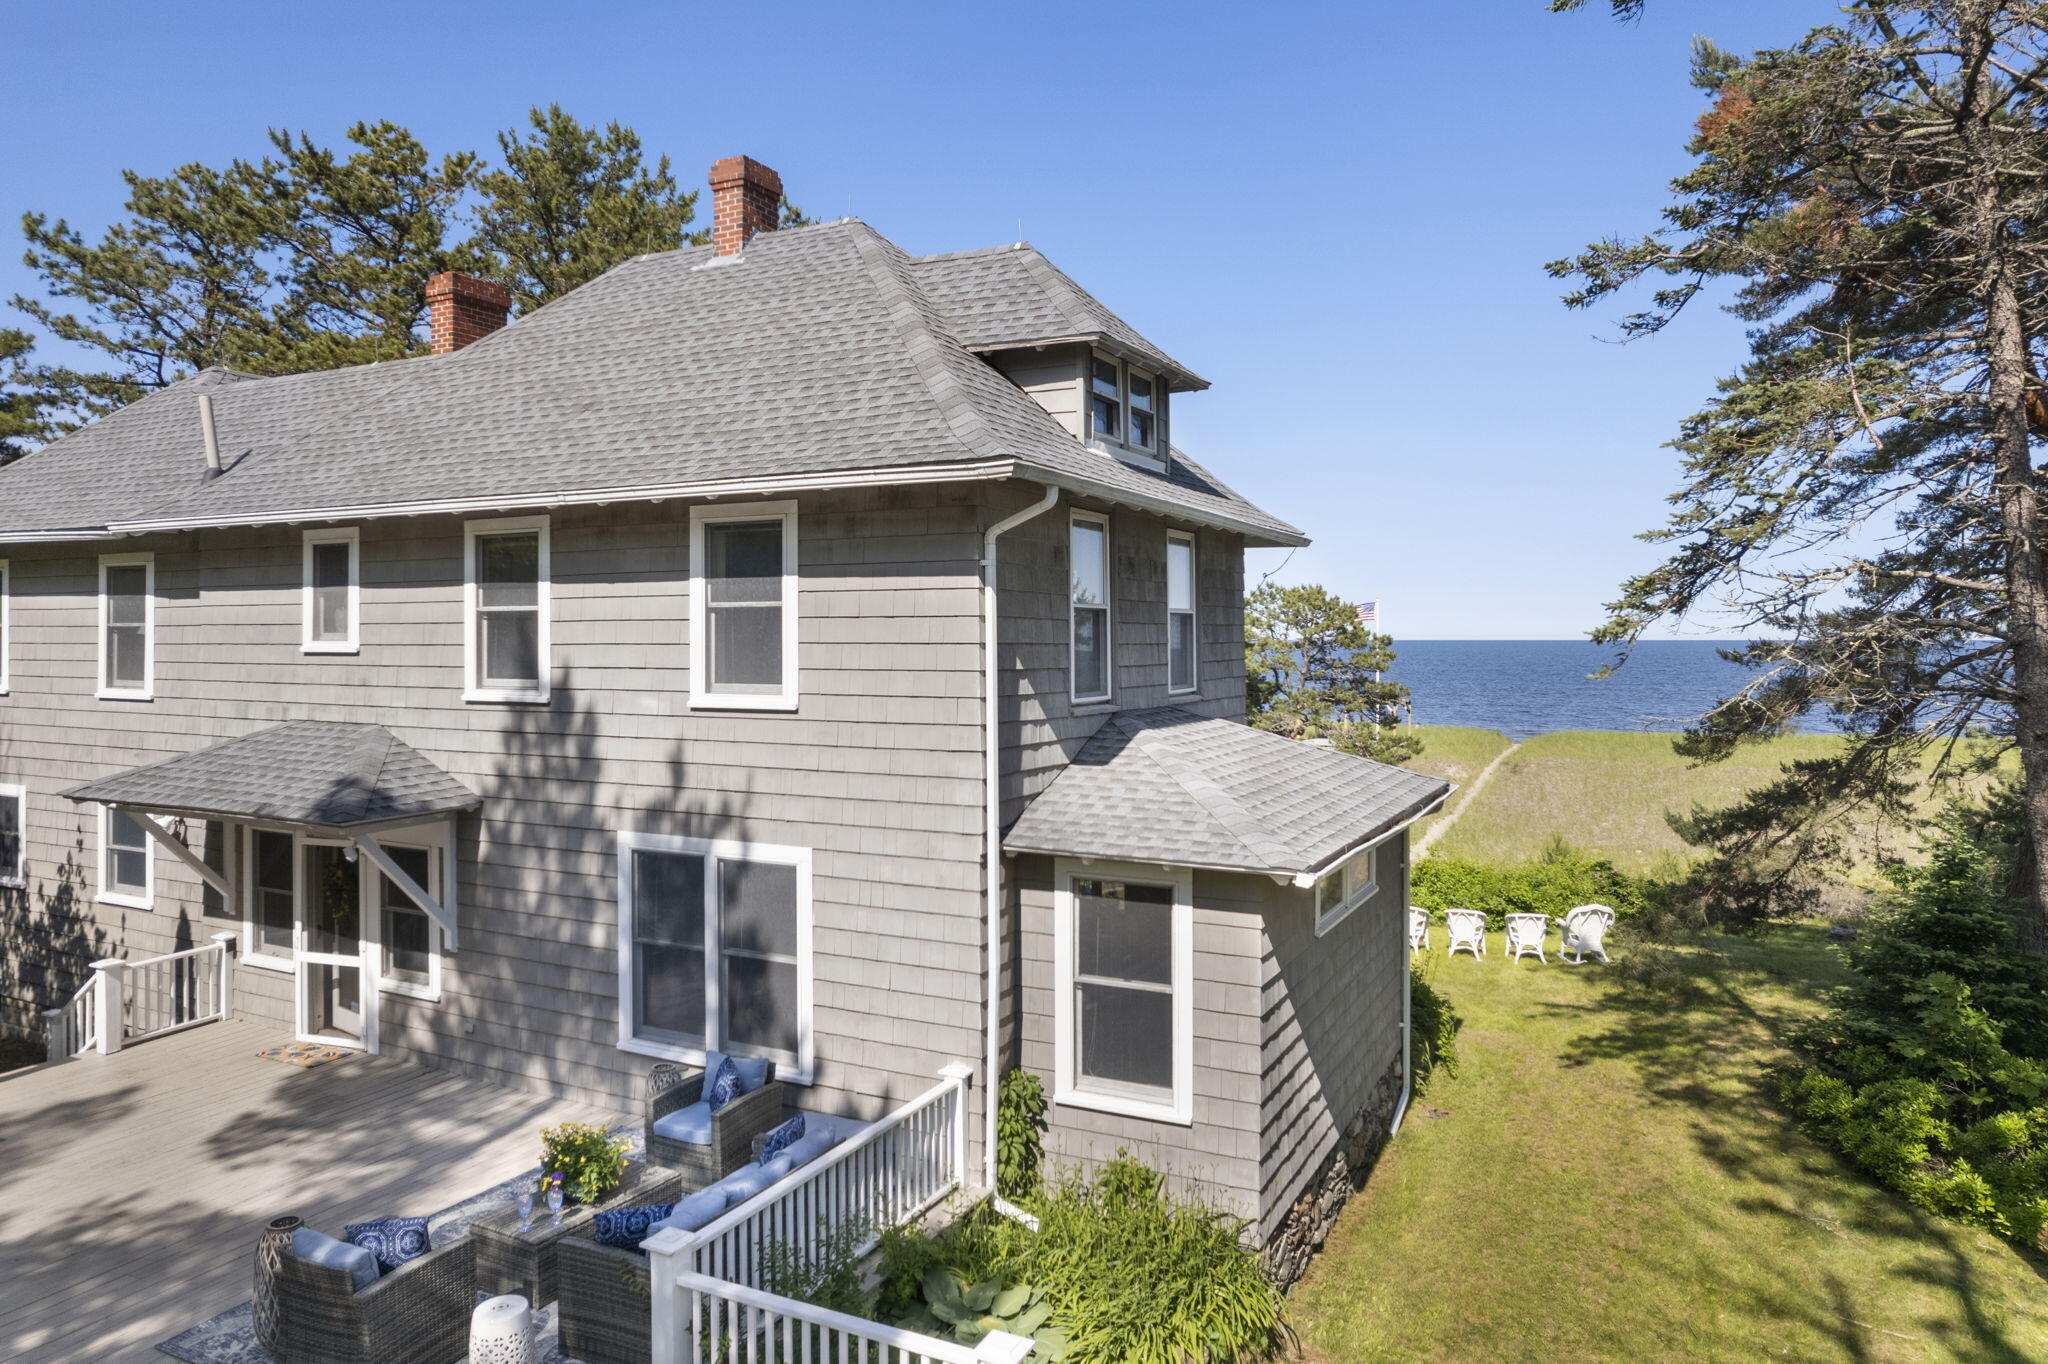 Waterfront Homes for Sale in Saco ME